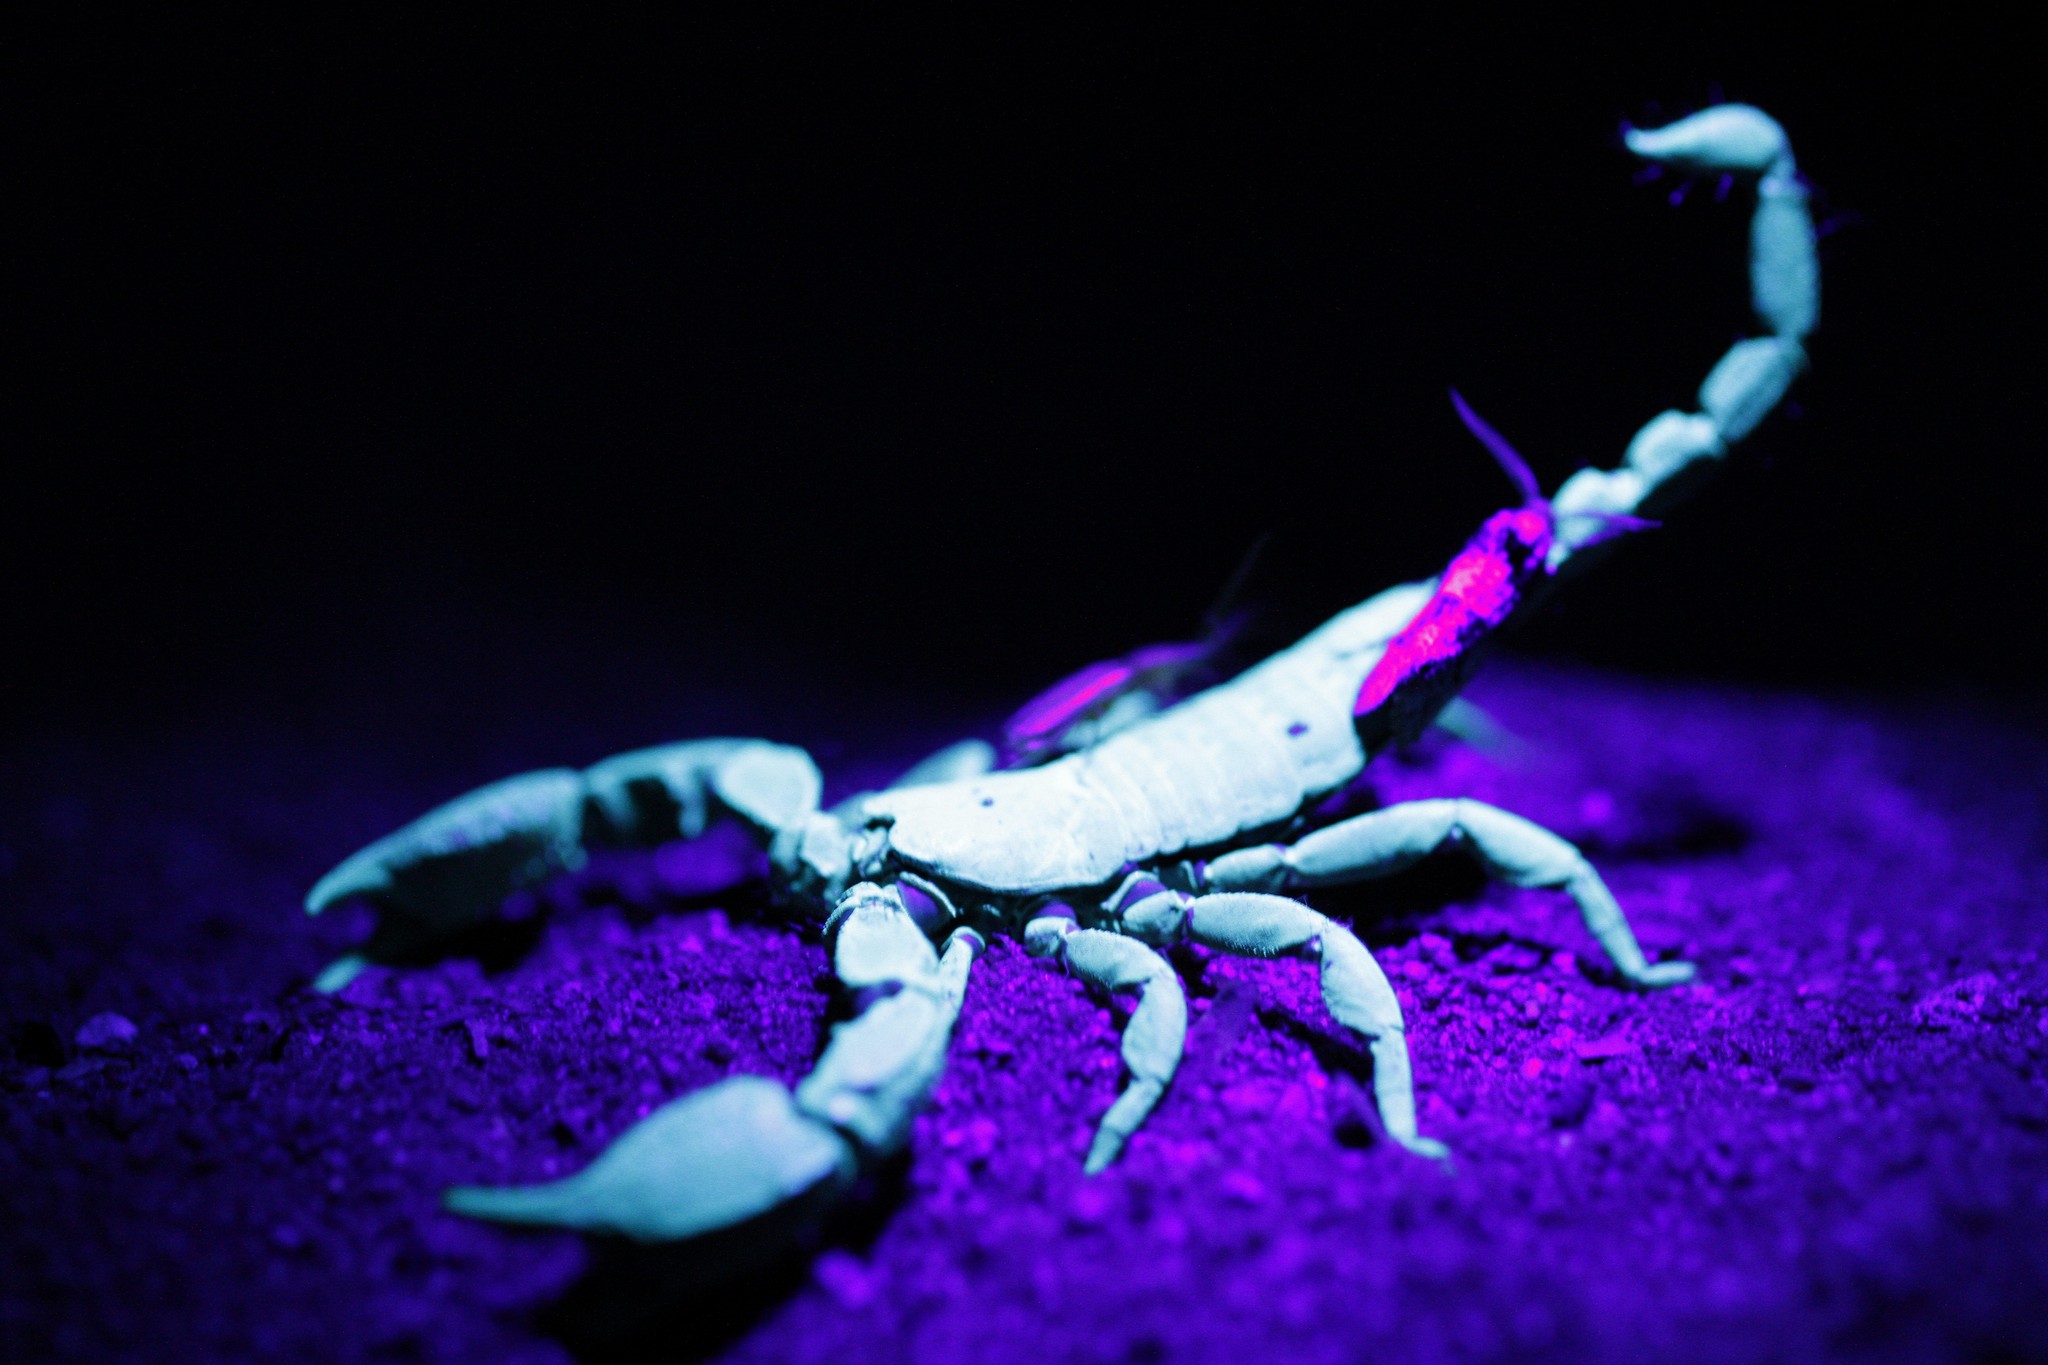 HD Wallpaper Scorpion Pictures